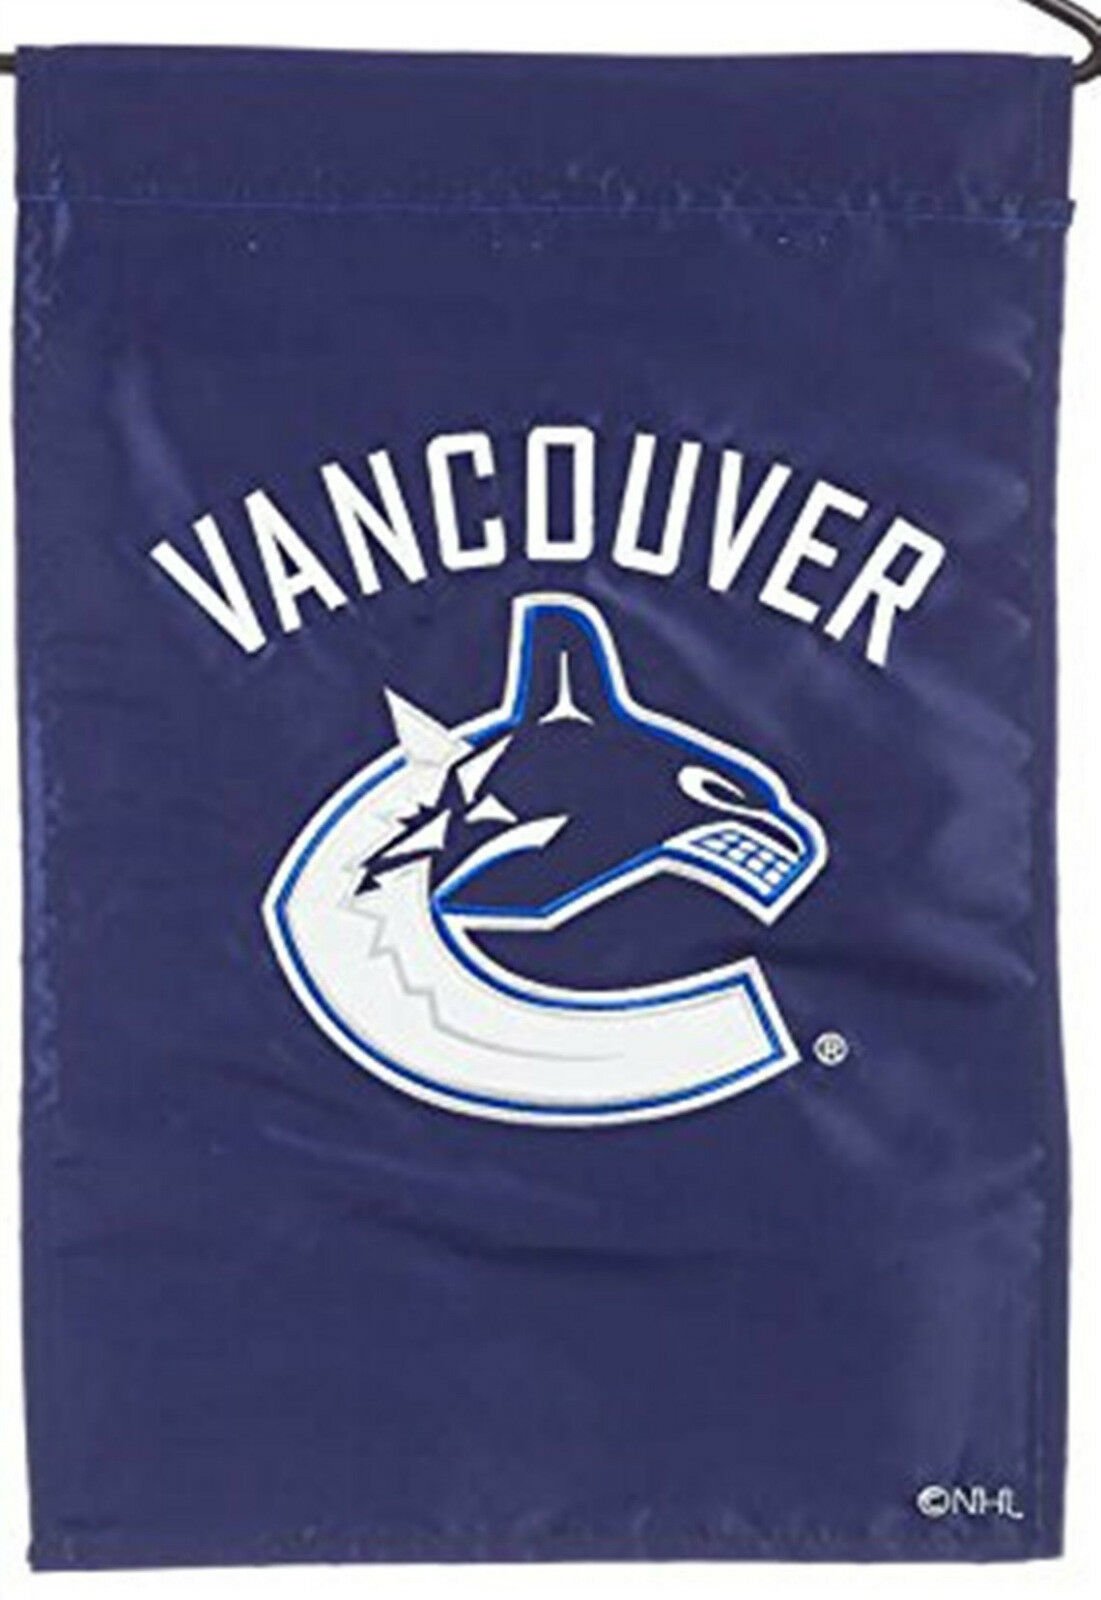 Vancouver Canucks Premium Garden Flag Banner, Double Sided, Embroidered Applique, 13x18 Inch